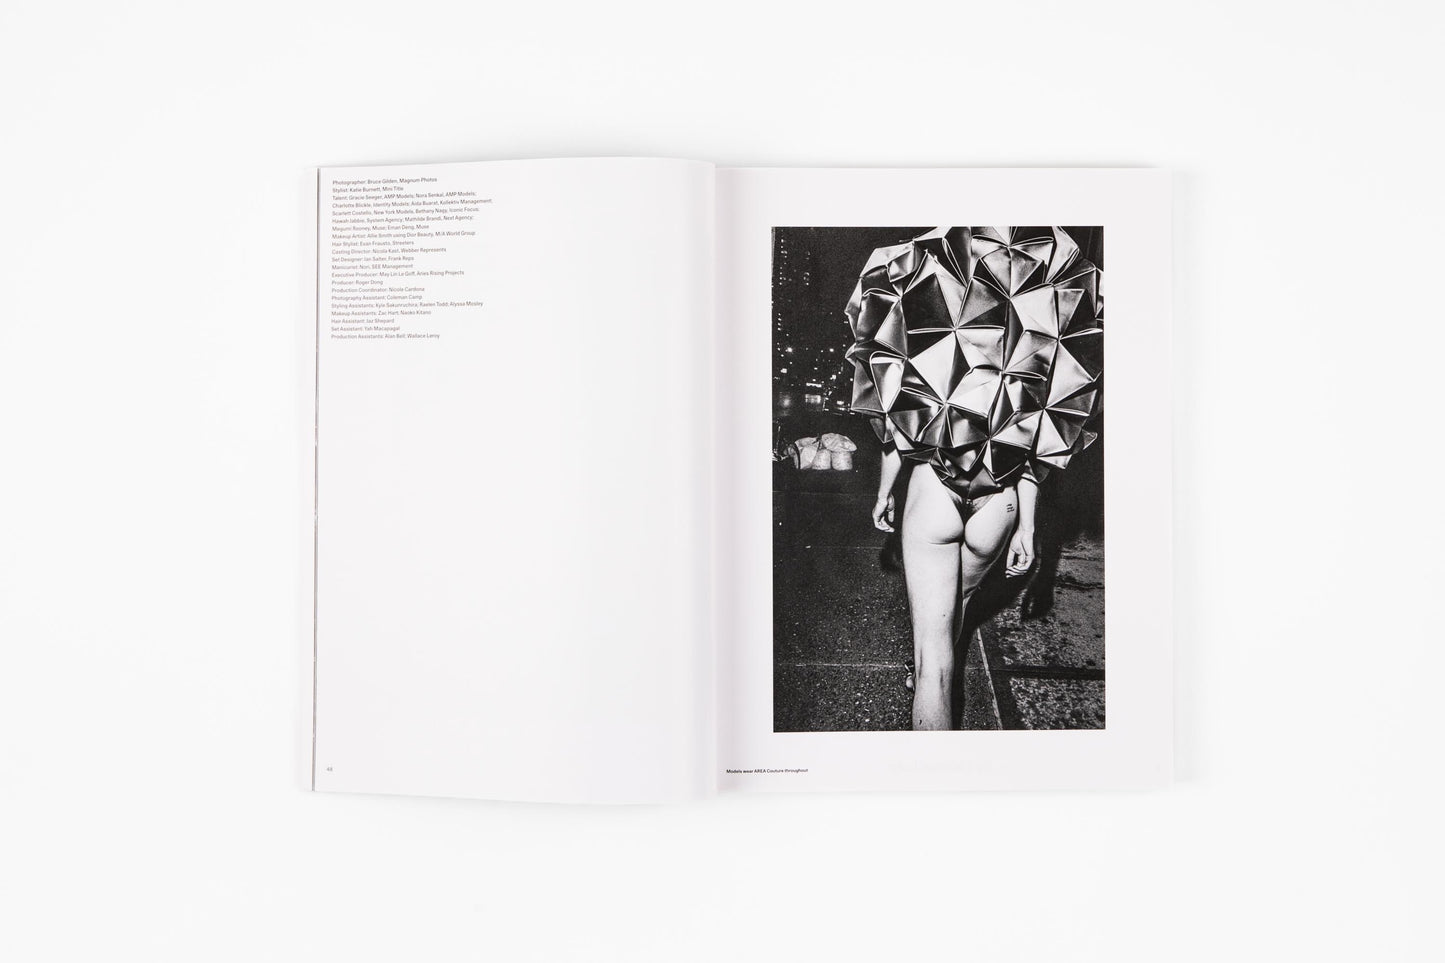 Middle Plane Issue 7: Clara Oscula by Vanessa Beecroft